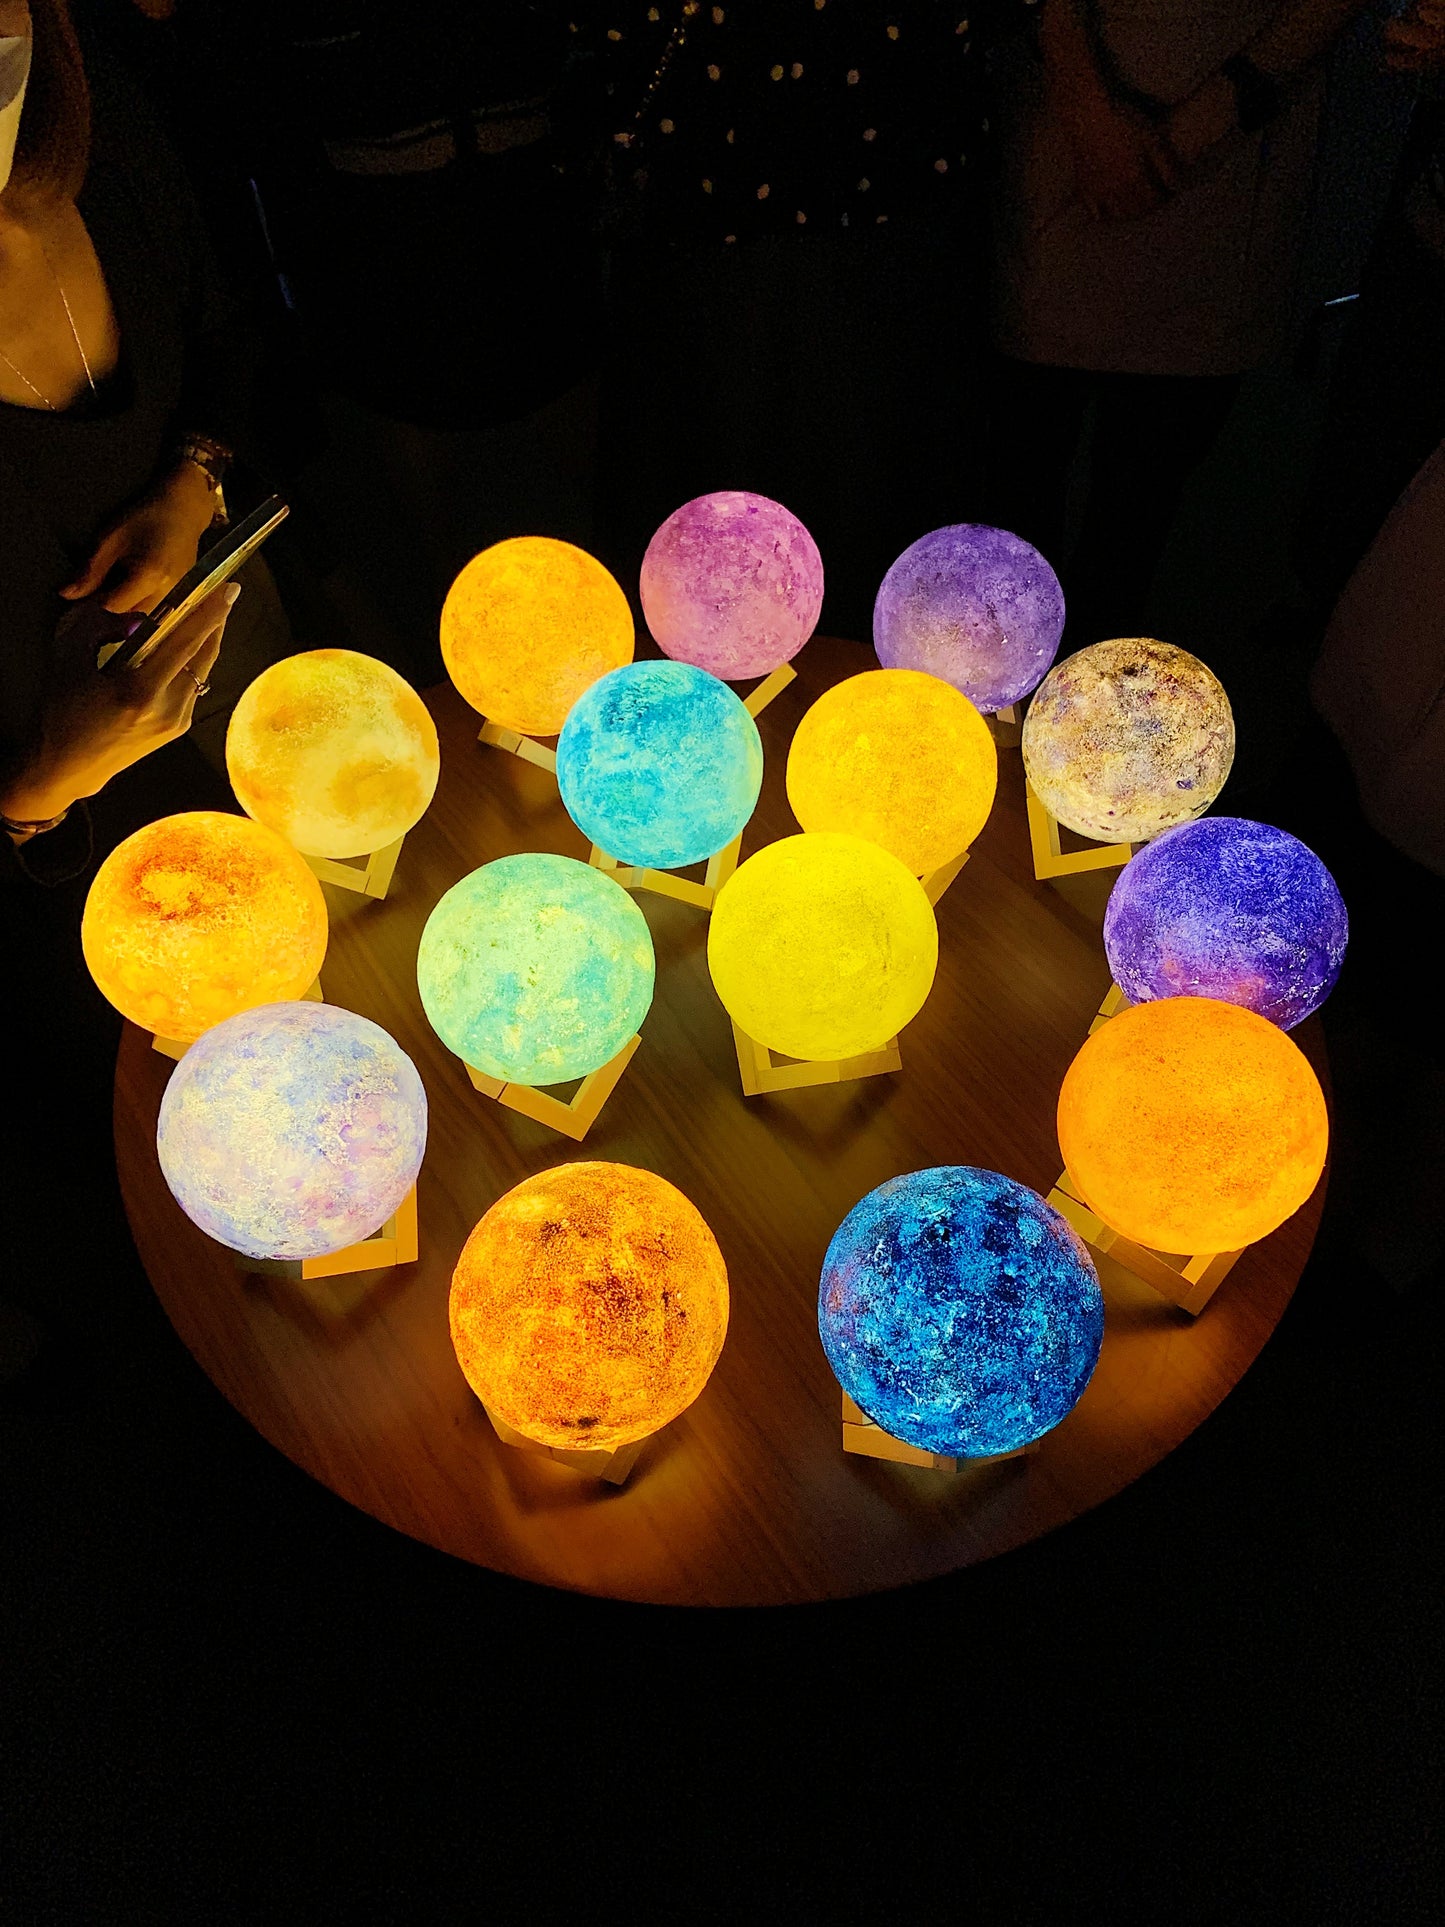 Professional color analysis combined with hand-painted moon lamp workshop